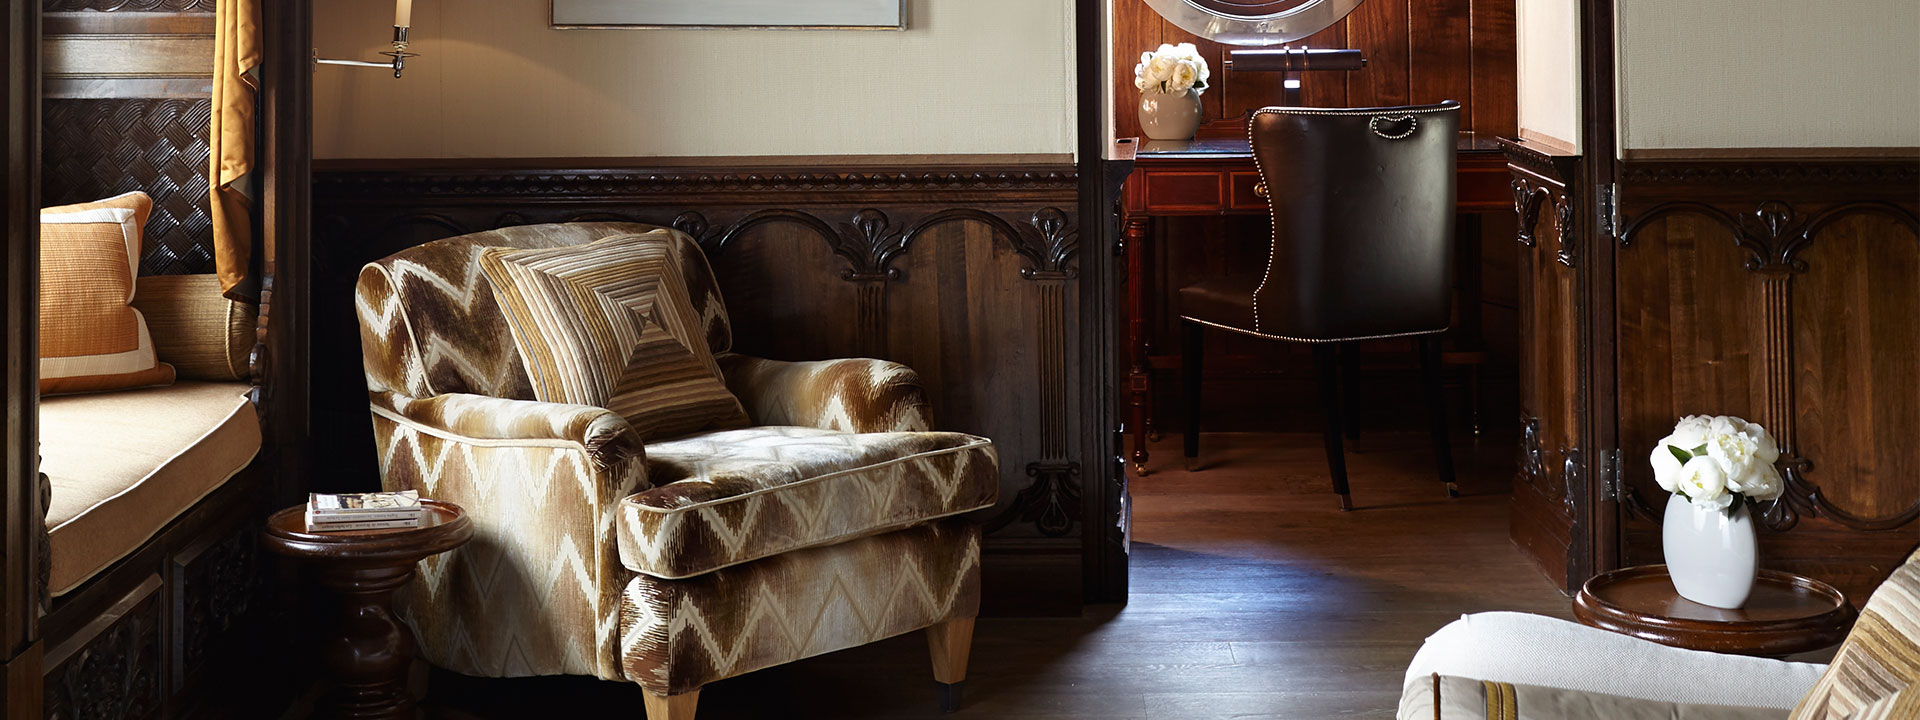 Details of The Prince's Lodge room at The Connaught, a comfortable armchair hand-carved from Kabul.